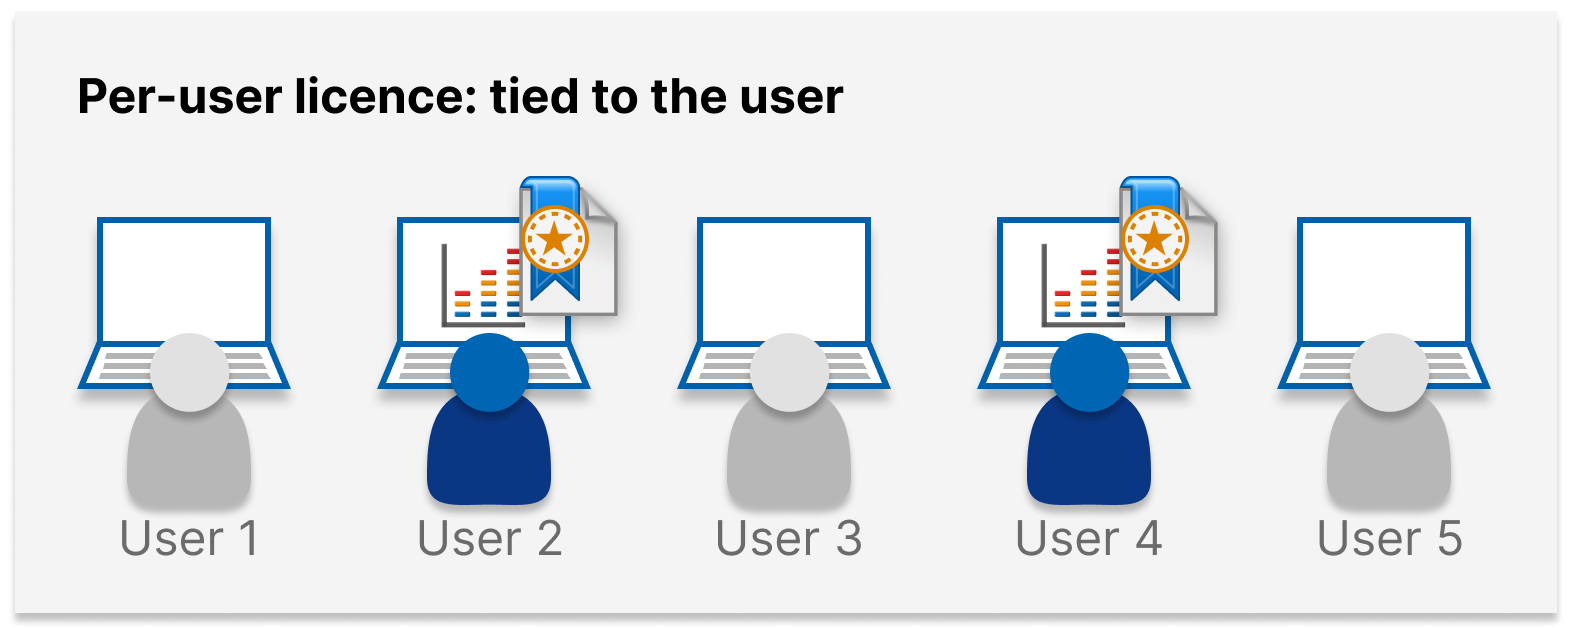 Per-user licence: tied to the user